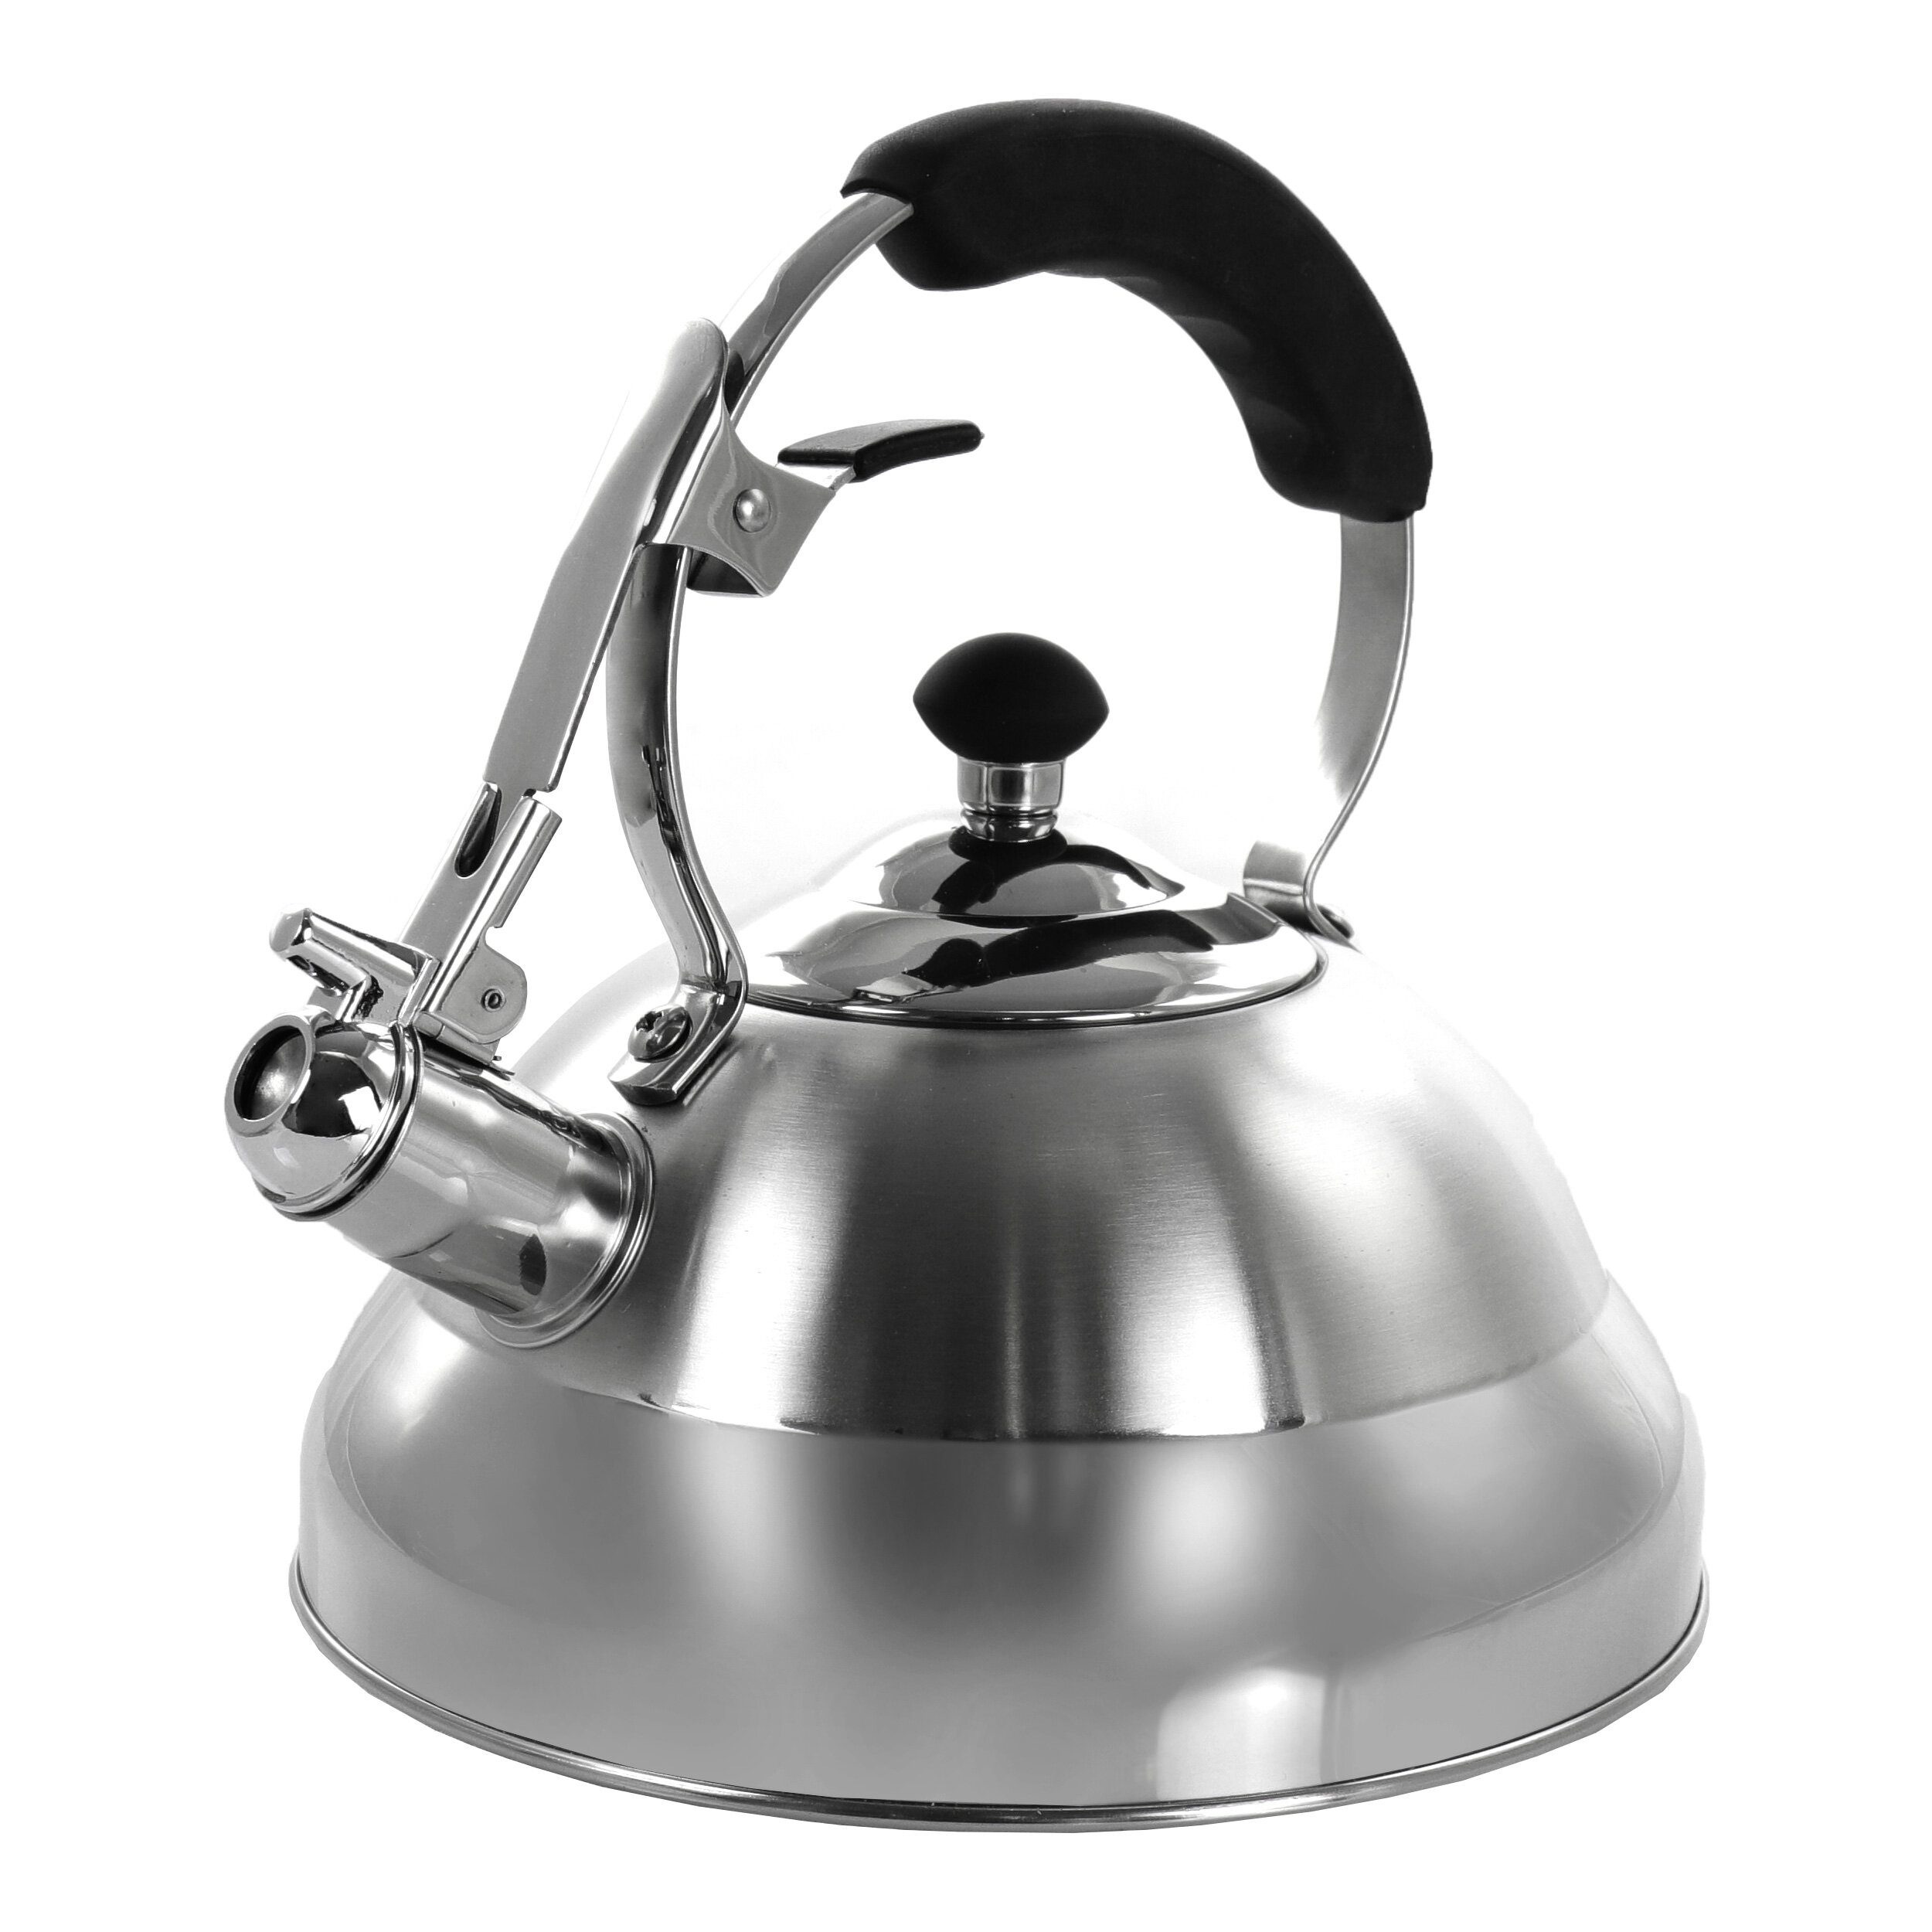 Tea kettle, Cute Whistling Tea Kettle for Stove Top with Dot Pattern, Small  Teapot with Loud Whistle Food Grade Stainless Steel Tea Pot Water Kettle